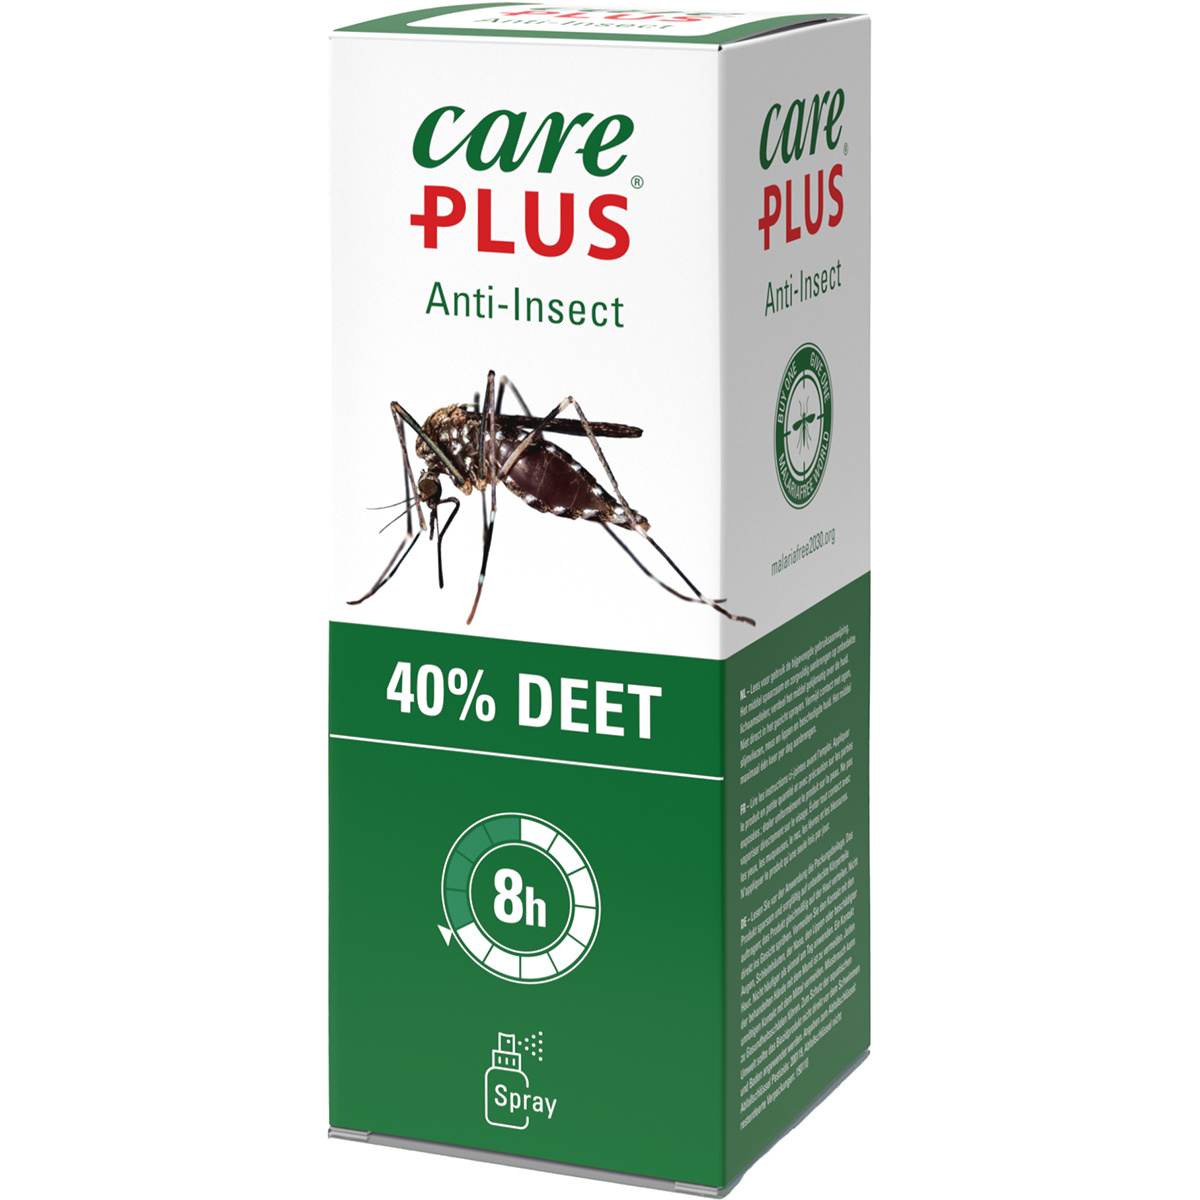 Care Plus Anti-Insect DEET 40% 2